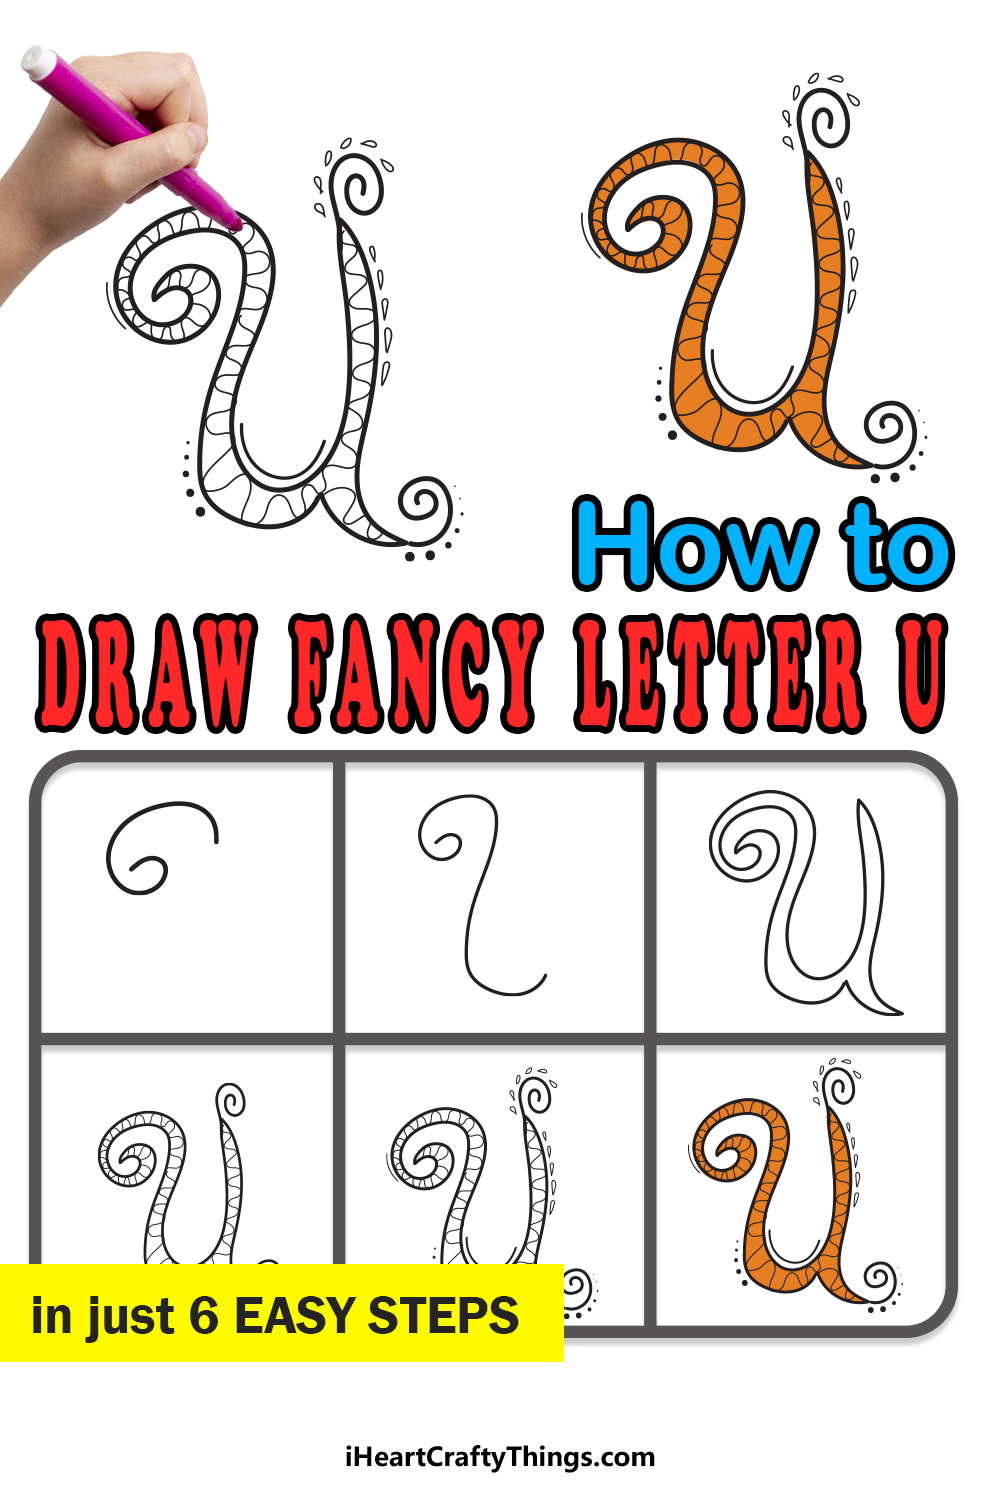 How To Draw Your Own Fancy U step by step guide